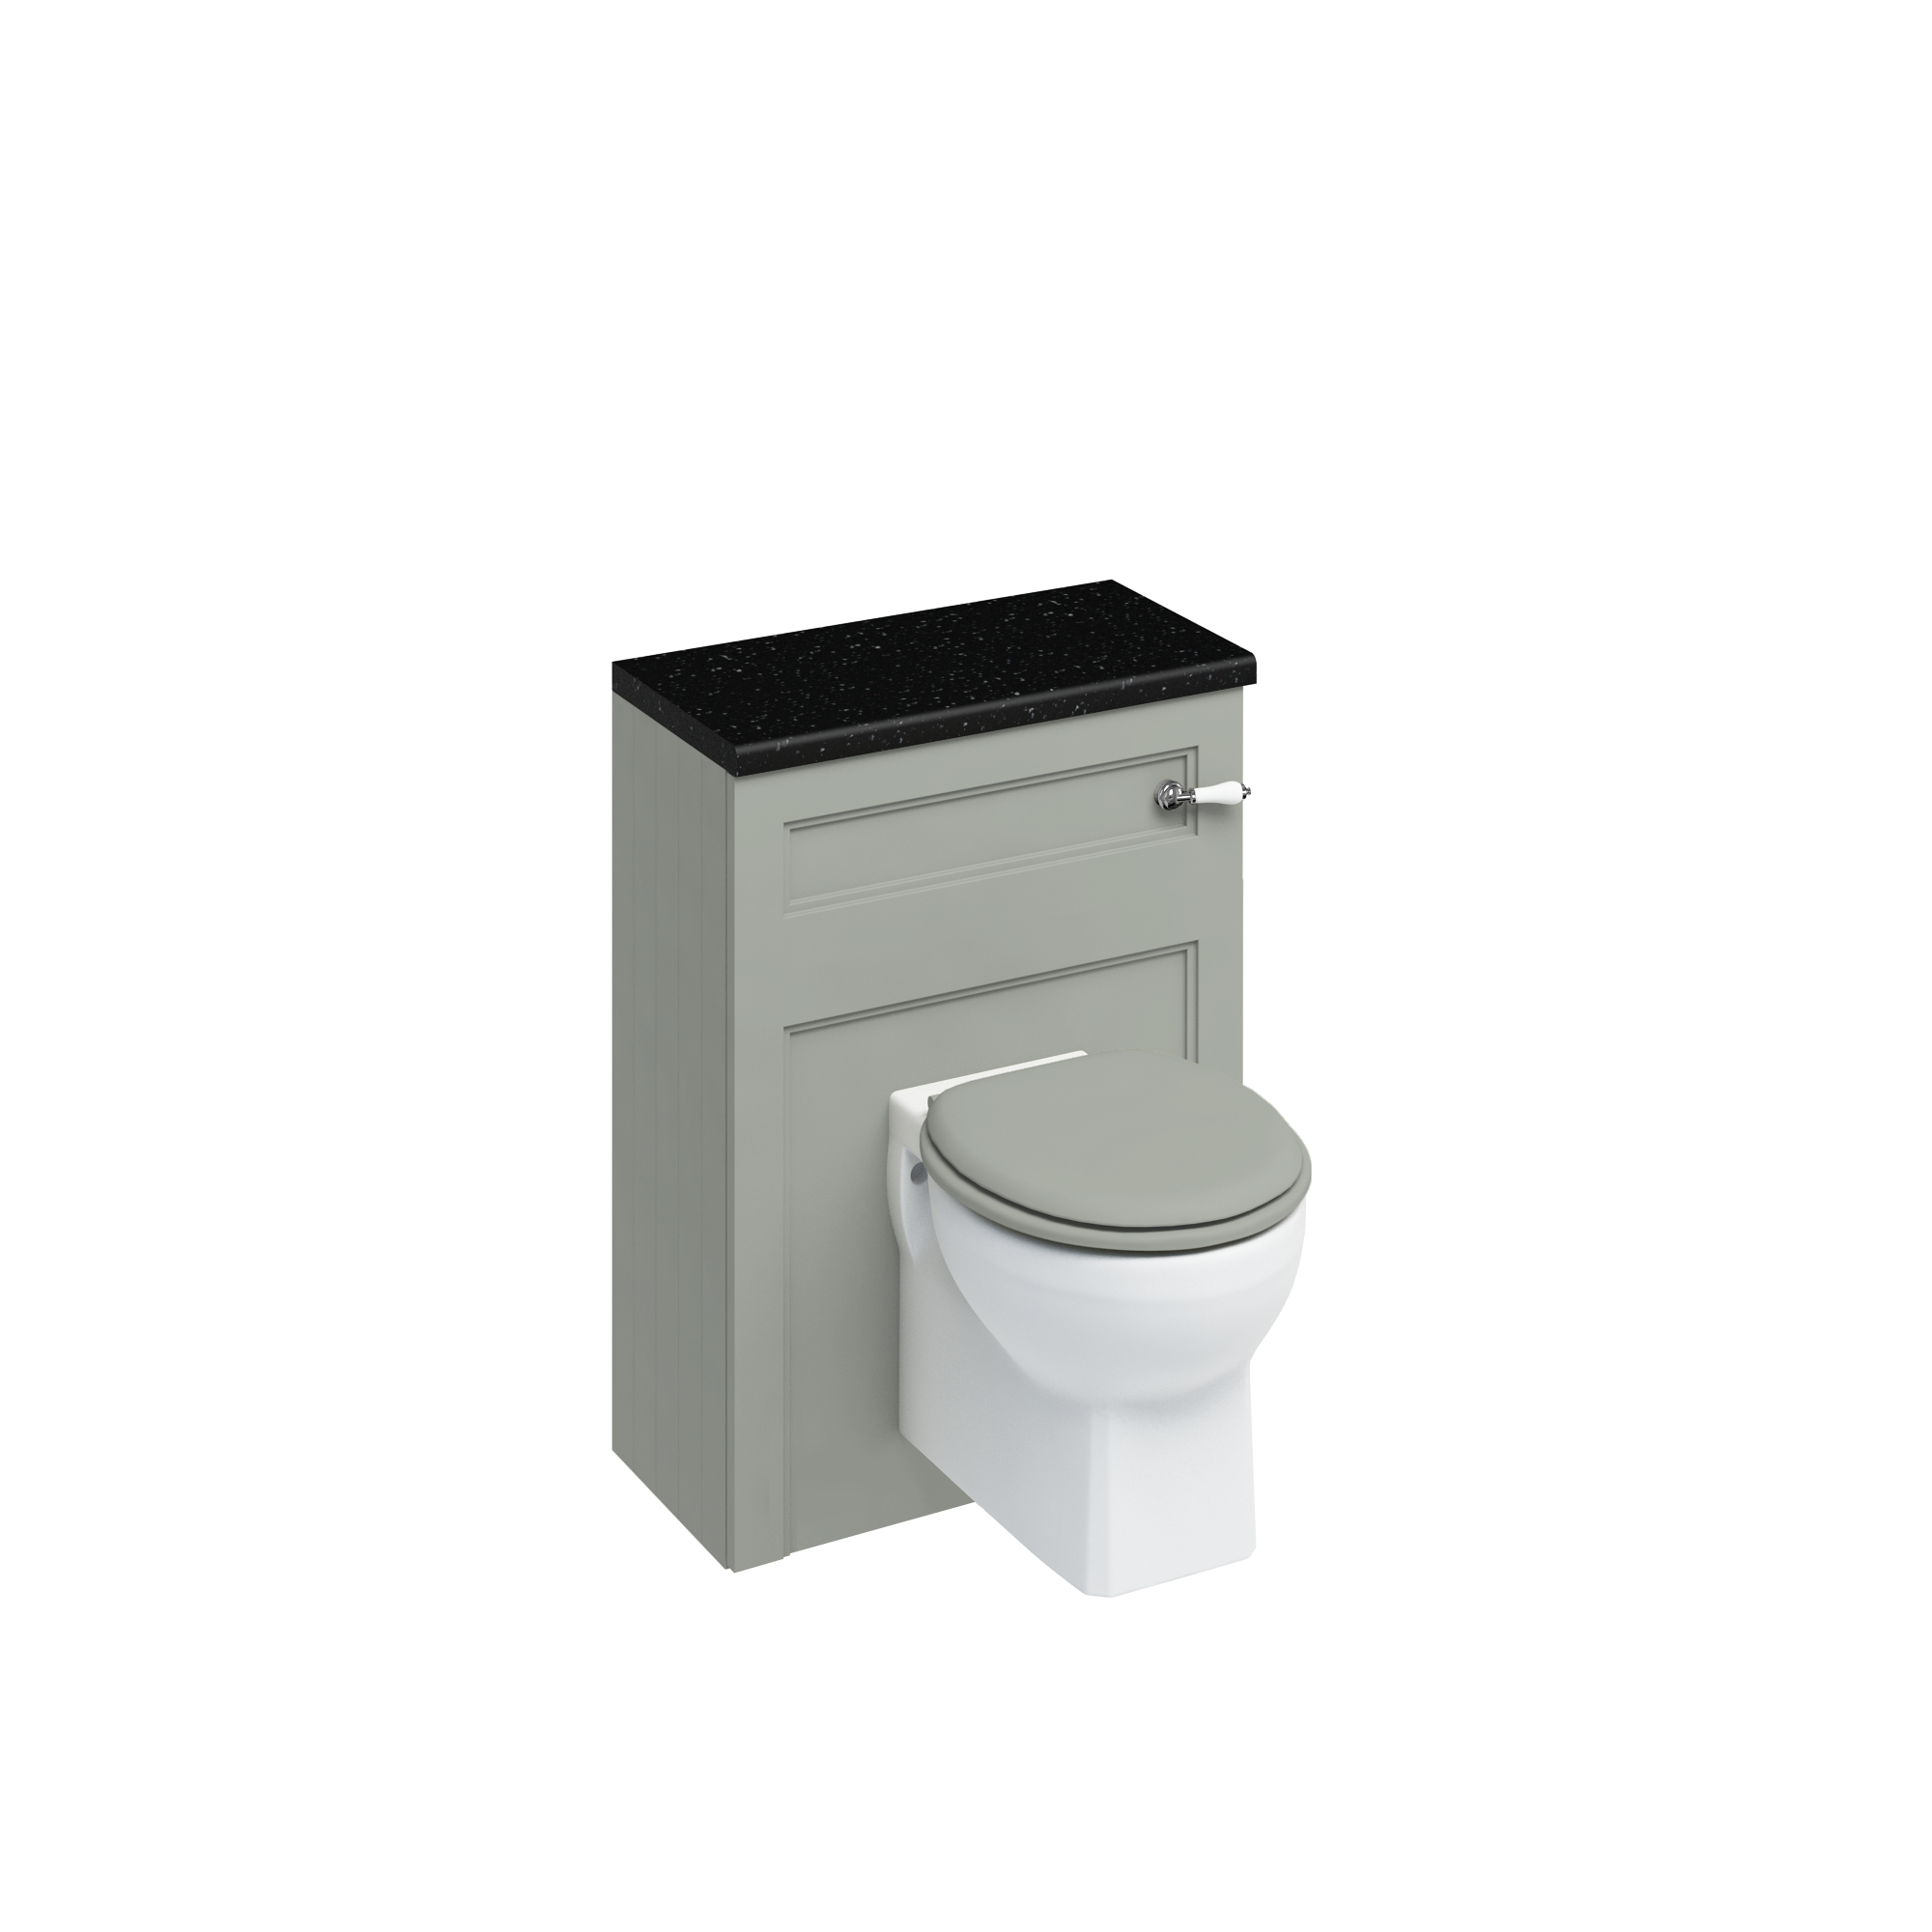 60 Wall hung WC Unit (including the cistern tank - lever flush ) - Dark Olive